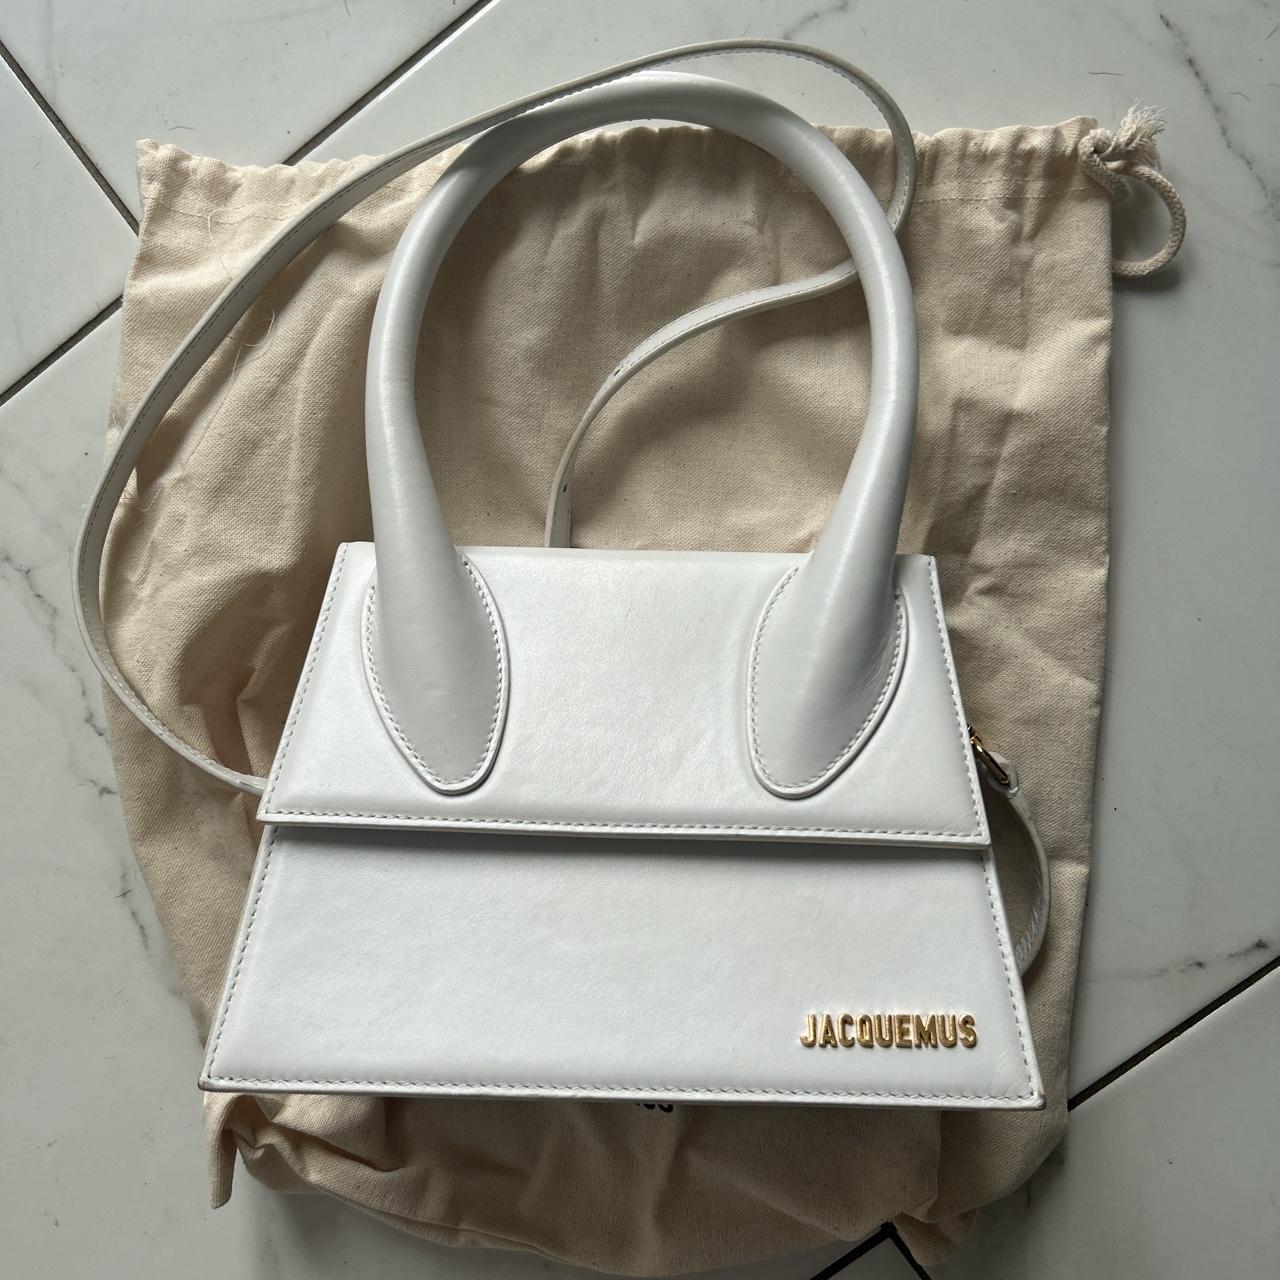 Jacquemus Women's White and Gold Bag | Depop